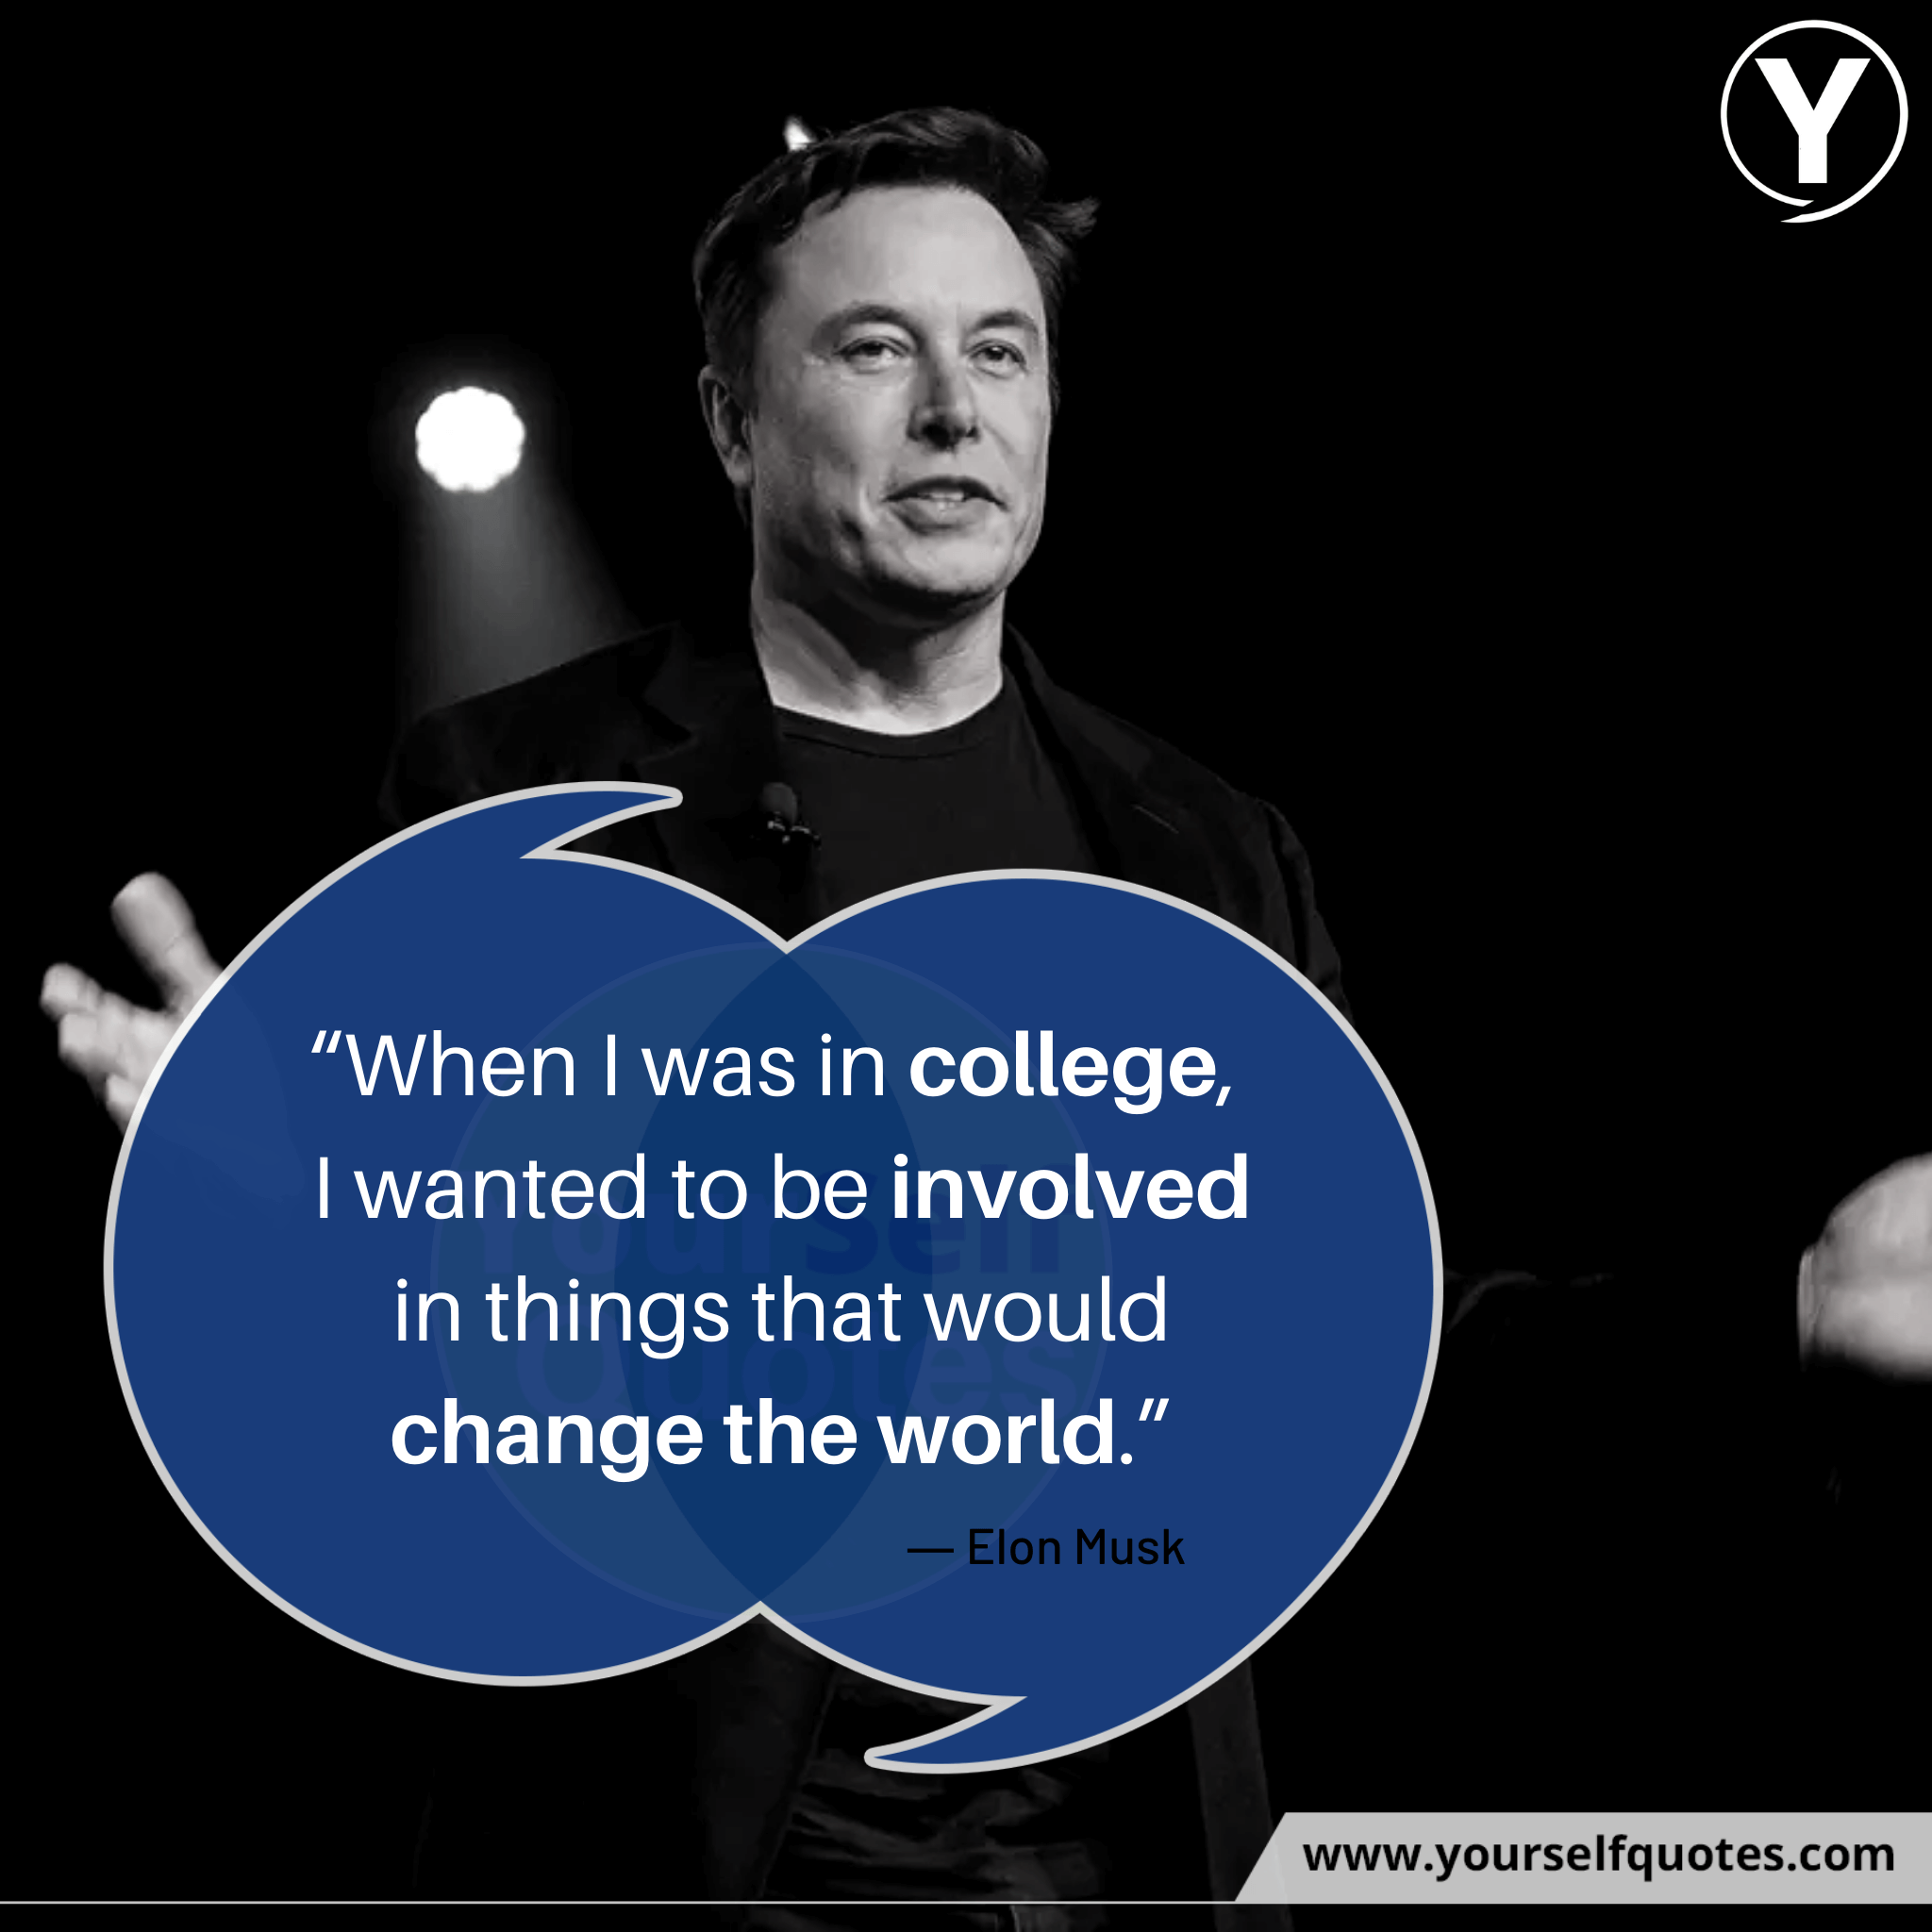 Elon Musk Quotes on Change the World